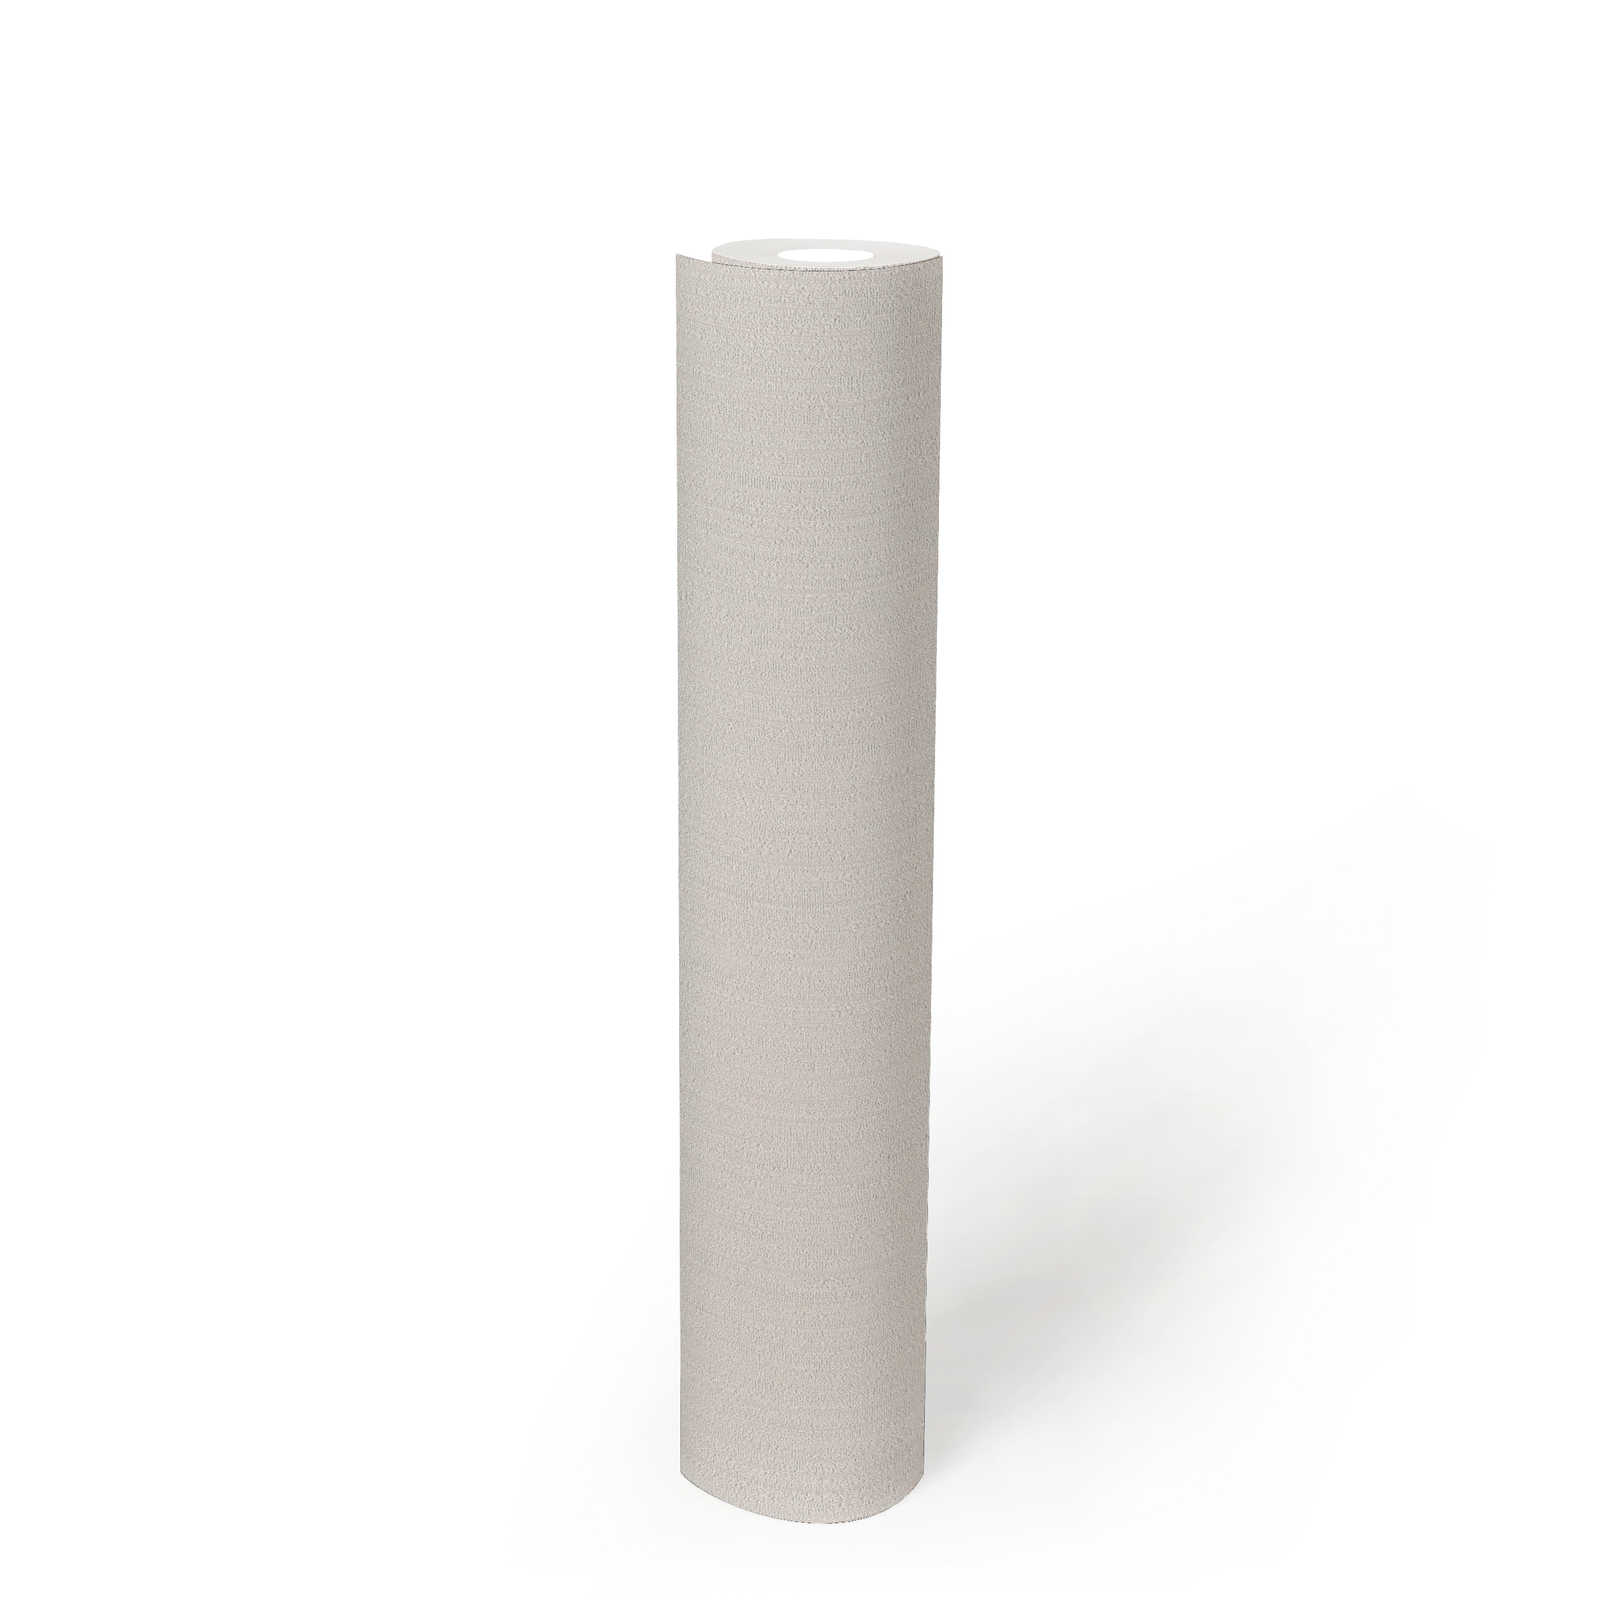             Cream white wallpaper satin with natural texture effect
        